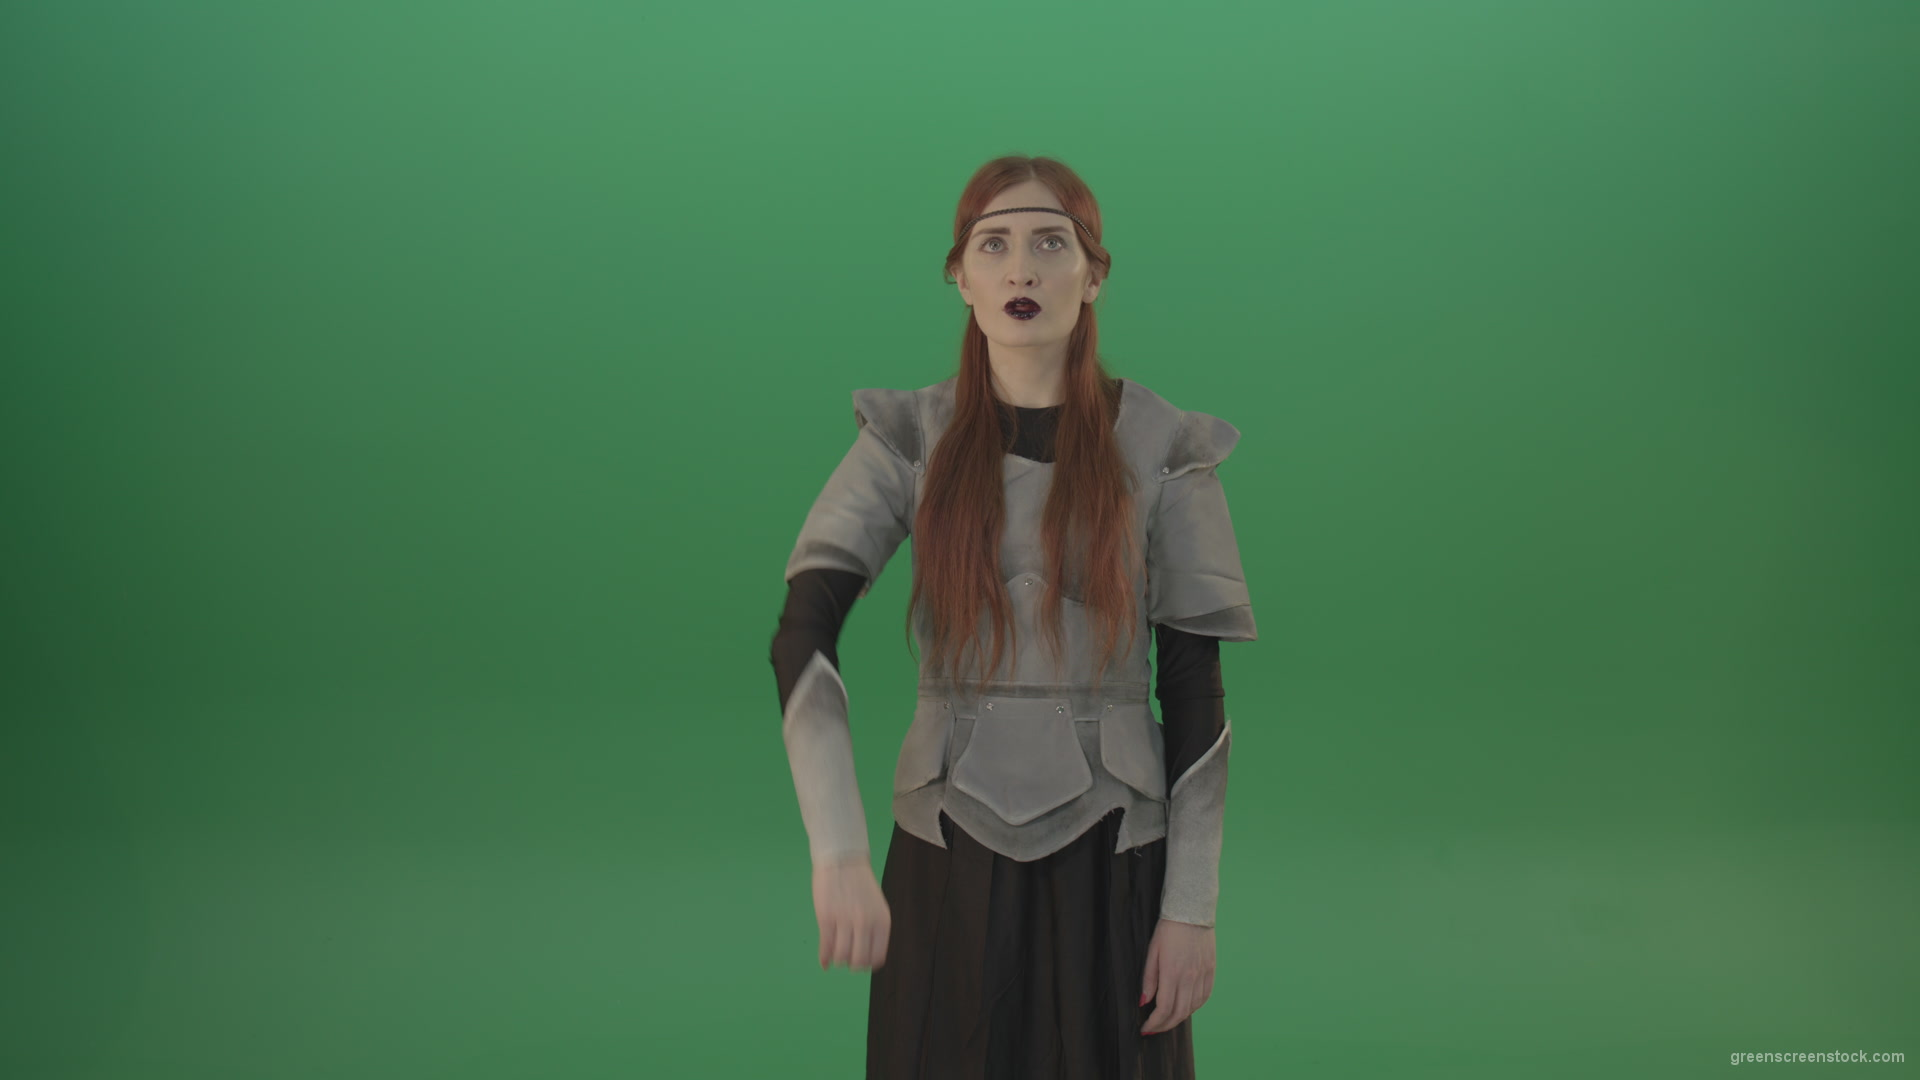 Actress-red-hair-girl-in-a-medieval-war-dress-crosses-praying-to-God-on-green-screen_002 Green Screen Stock